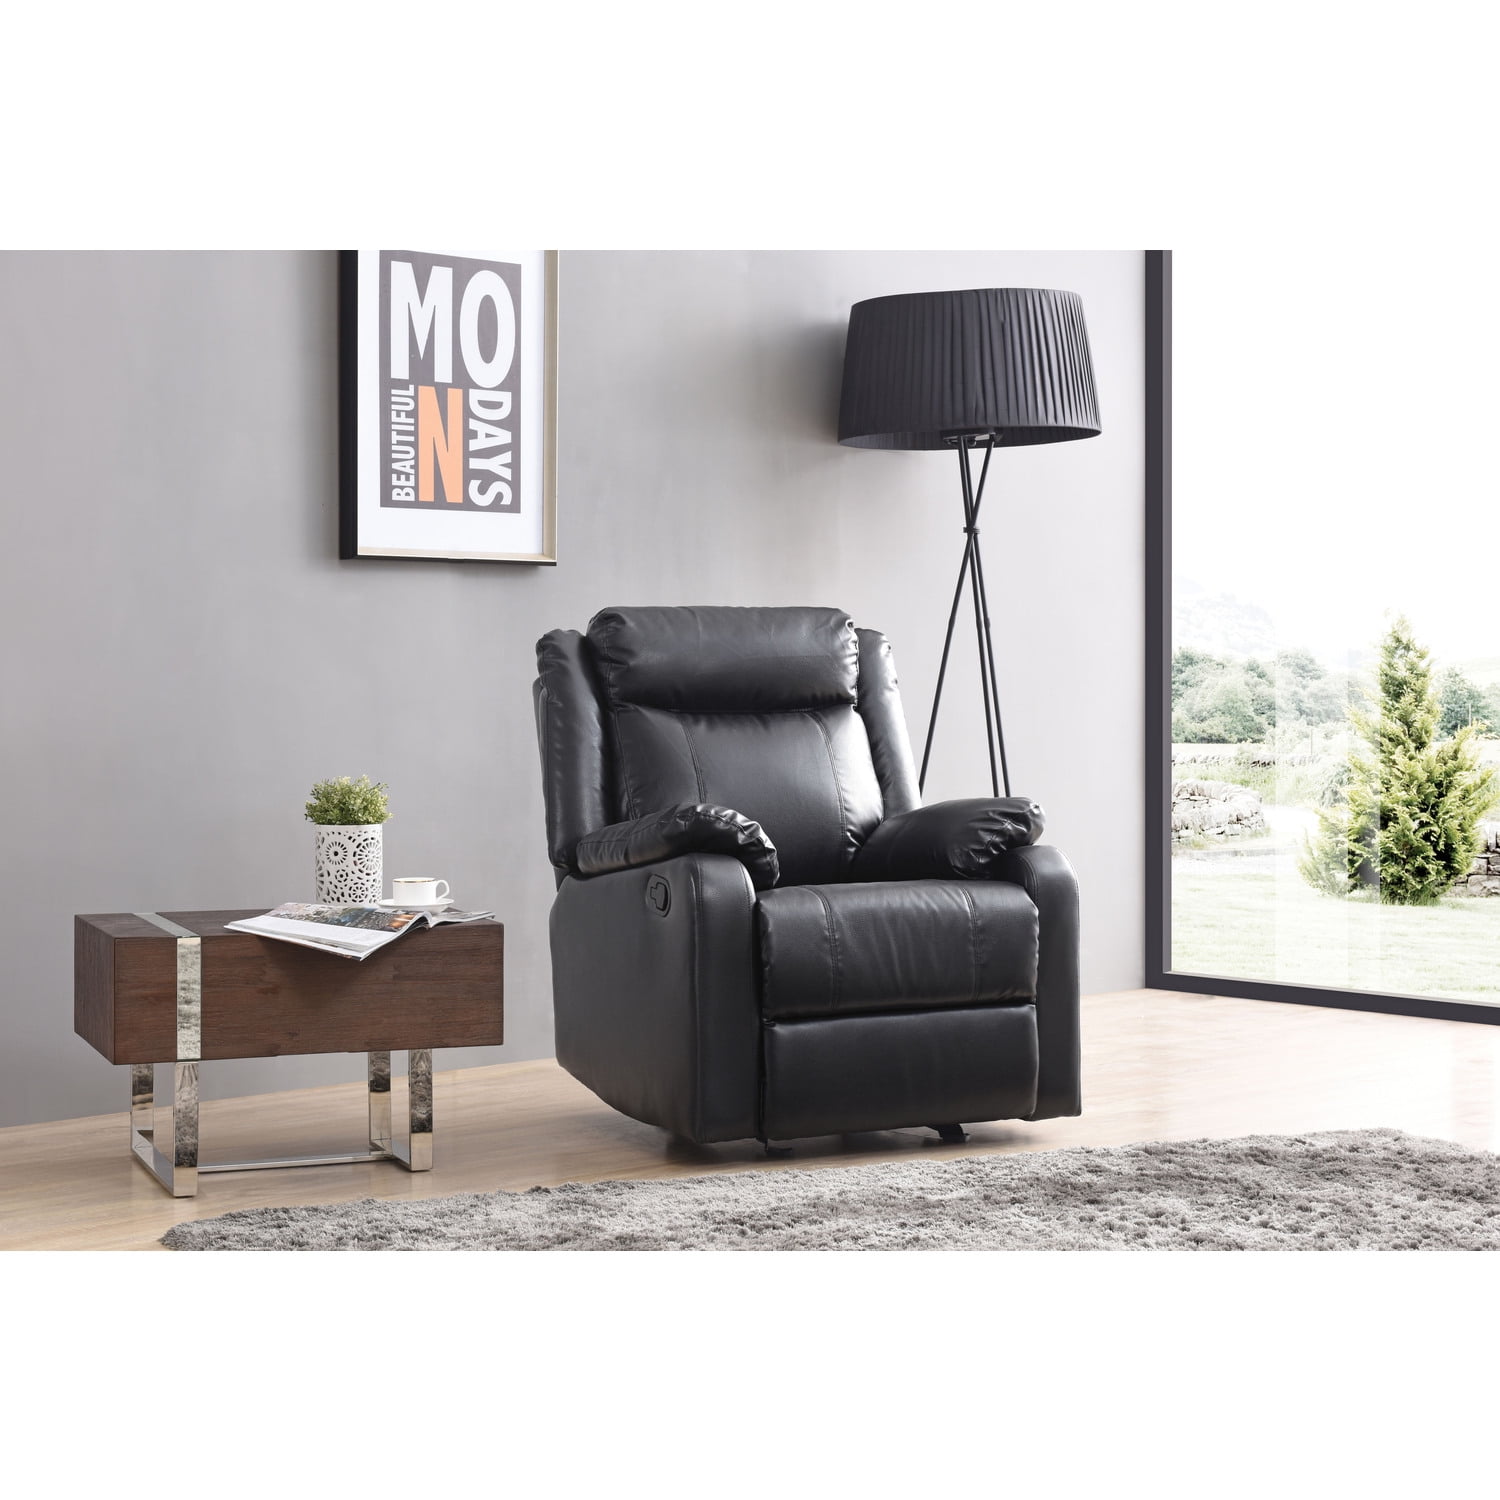 96406254 PL D,1362 Anthracite BEST Charleston Lounger with Cushion